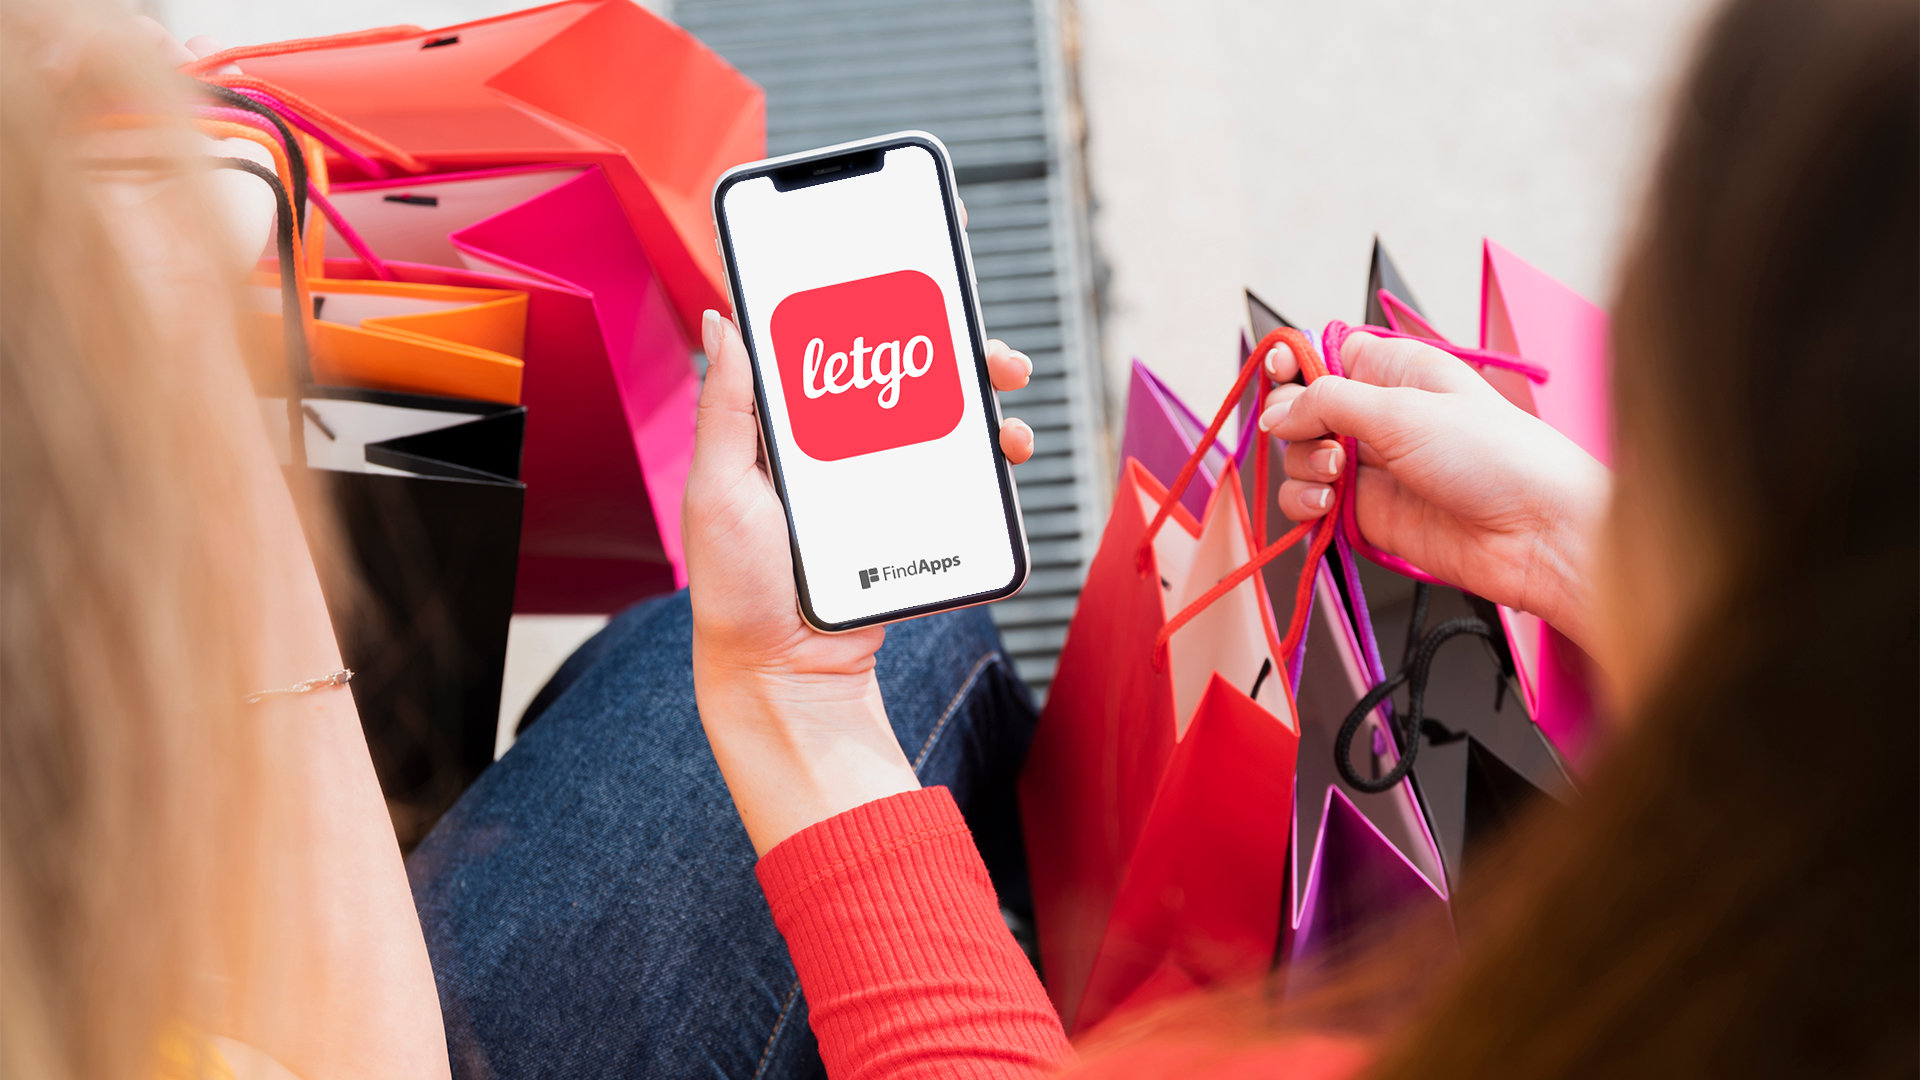 "letgo: Buy & Sell Used Stuff" app, review.